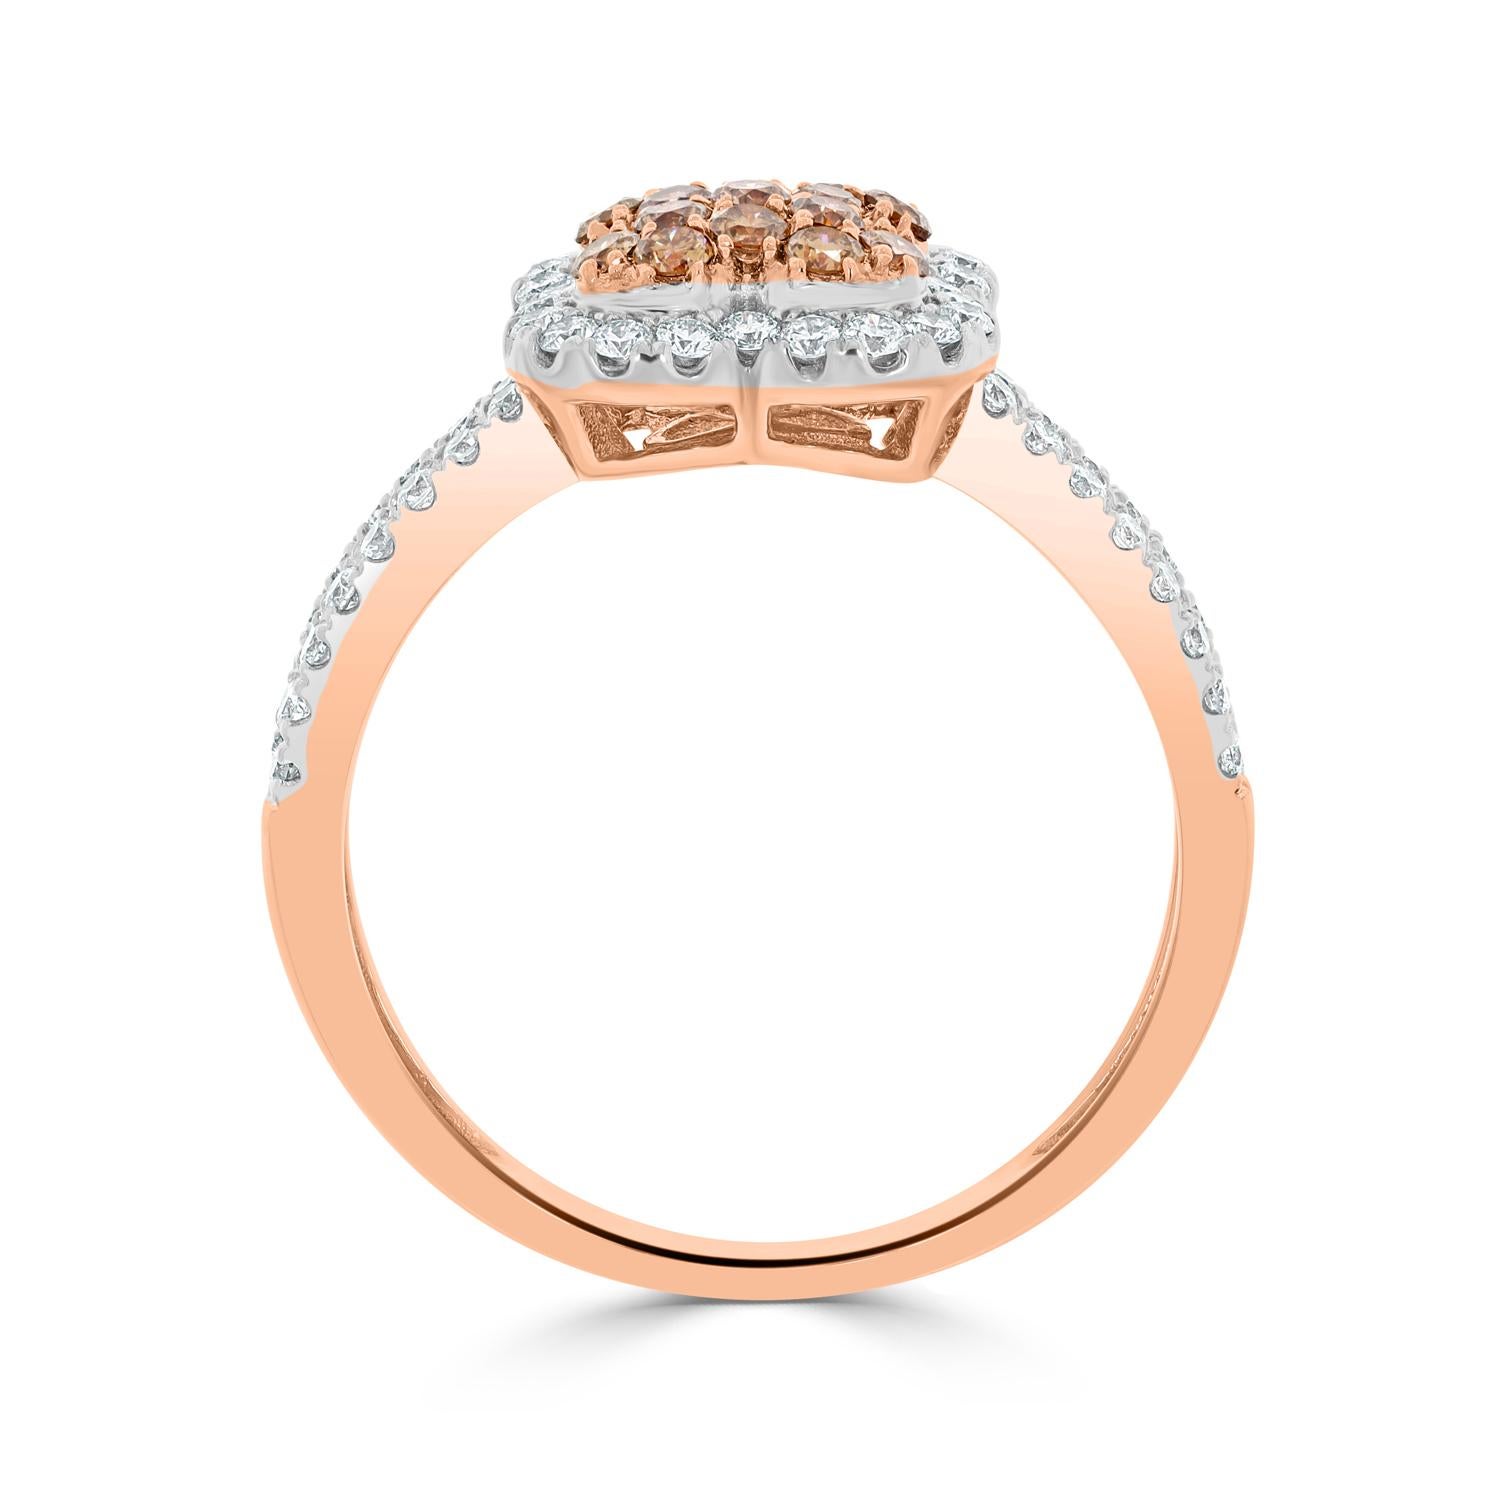 This luscious ring will add radiant beauty and elegance to your overall look. Designed with 14kt rose gold and decorated with round-cut Diamonds, this ring strikes the perfect balance between sophistication and statement-making beauty.